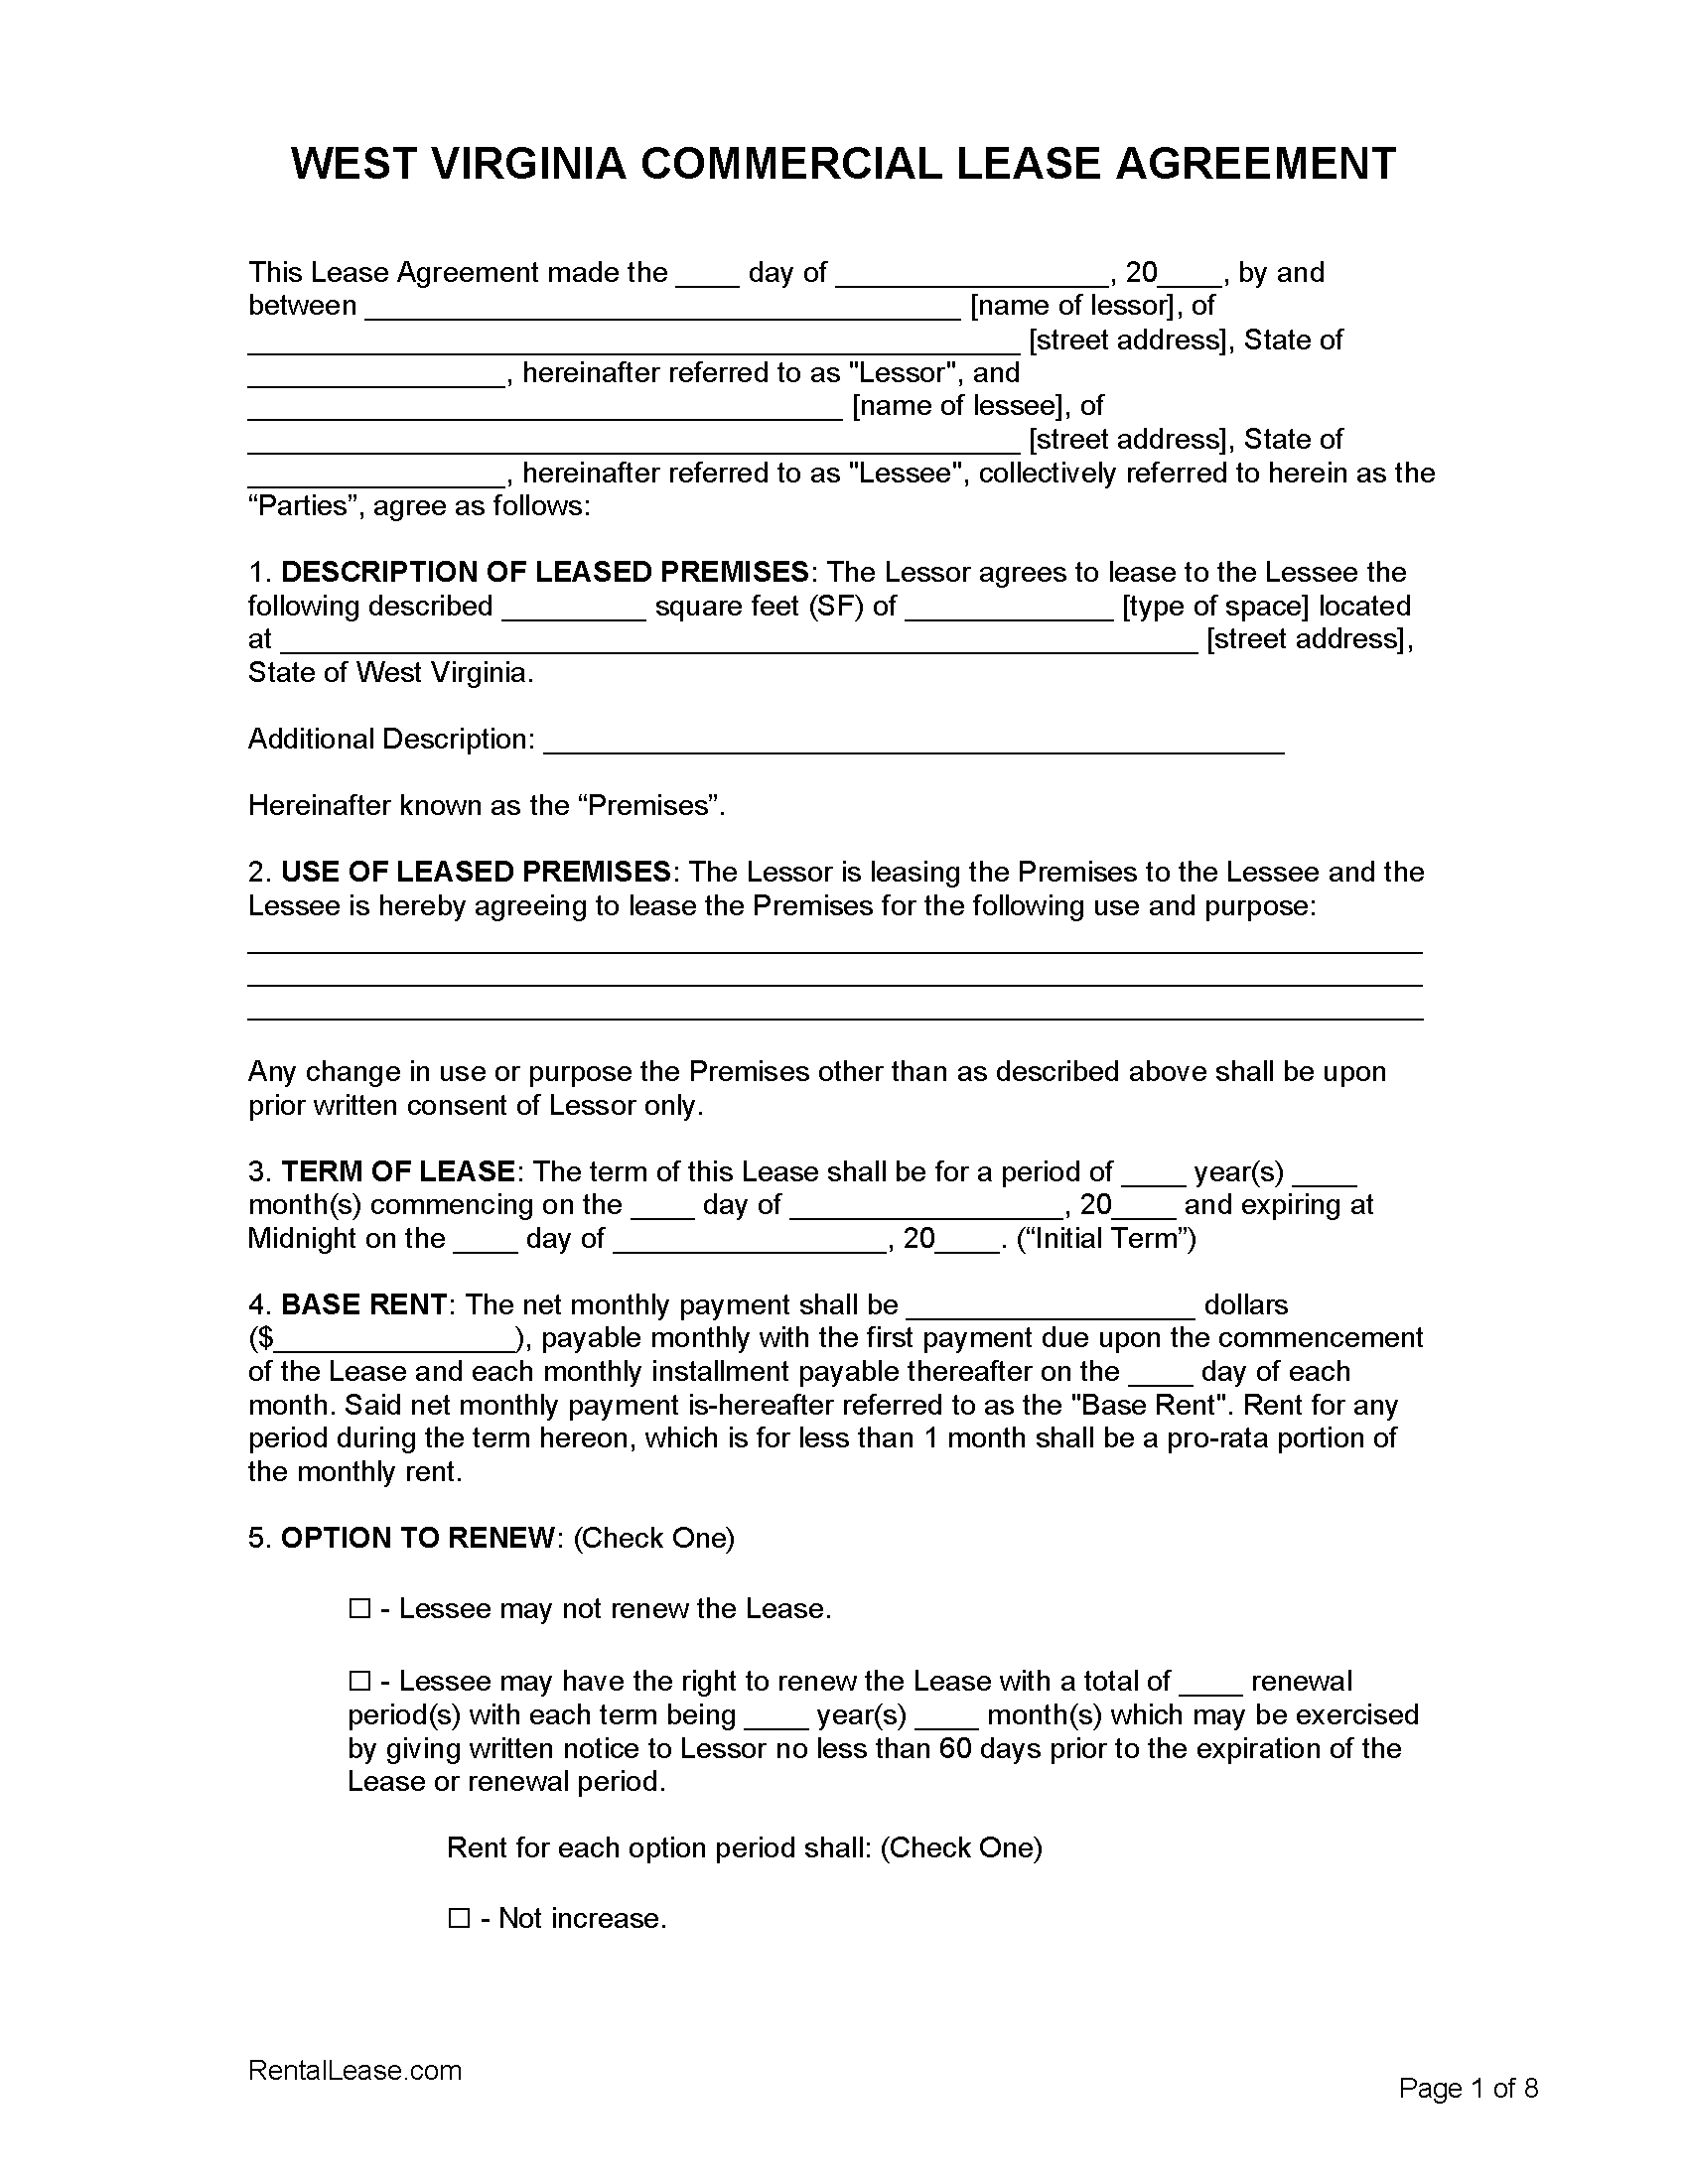 Free West Virginia Commercial Lease Agreement Template PDF Word